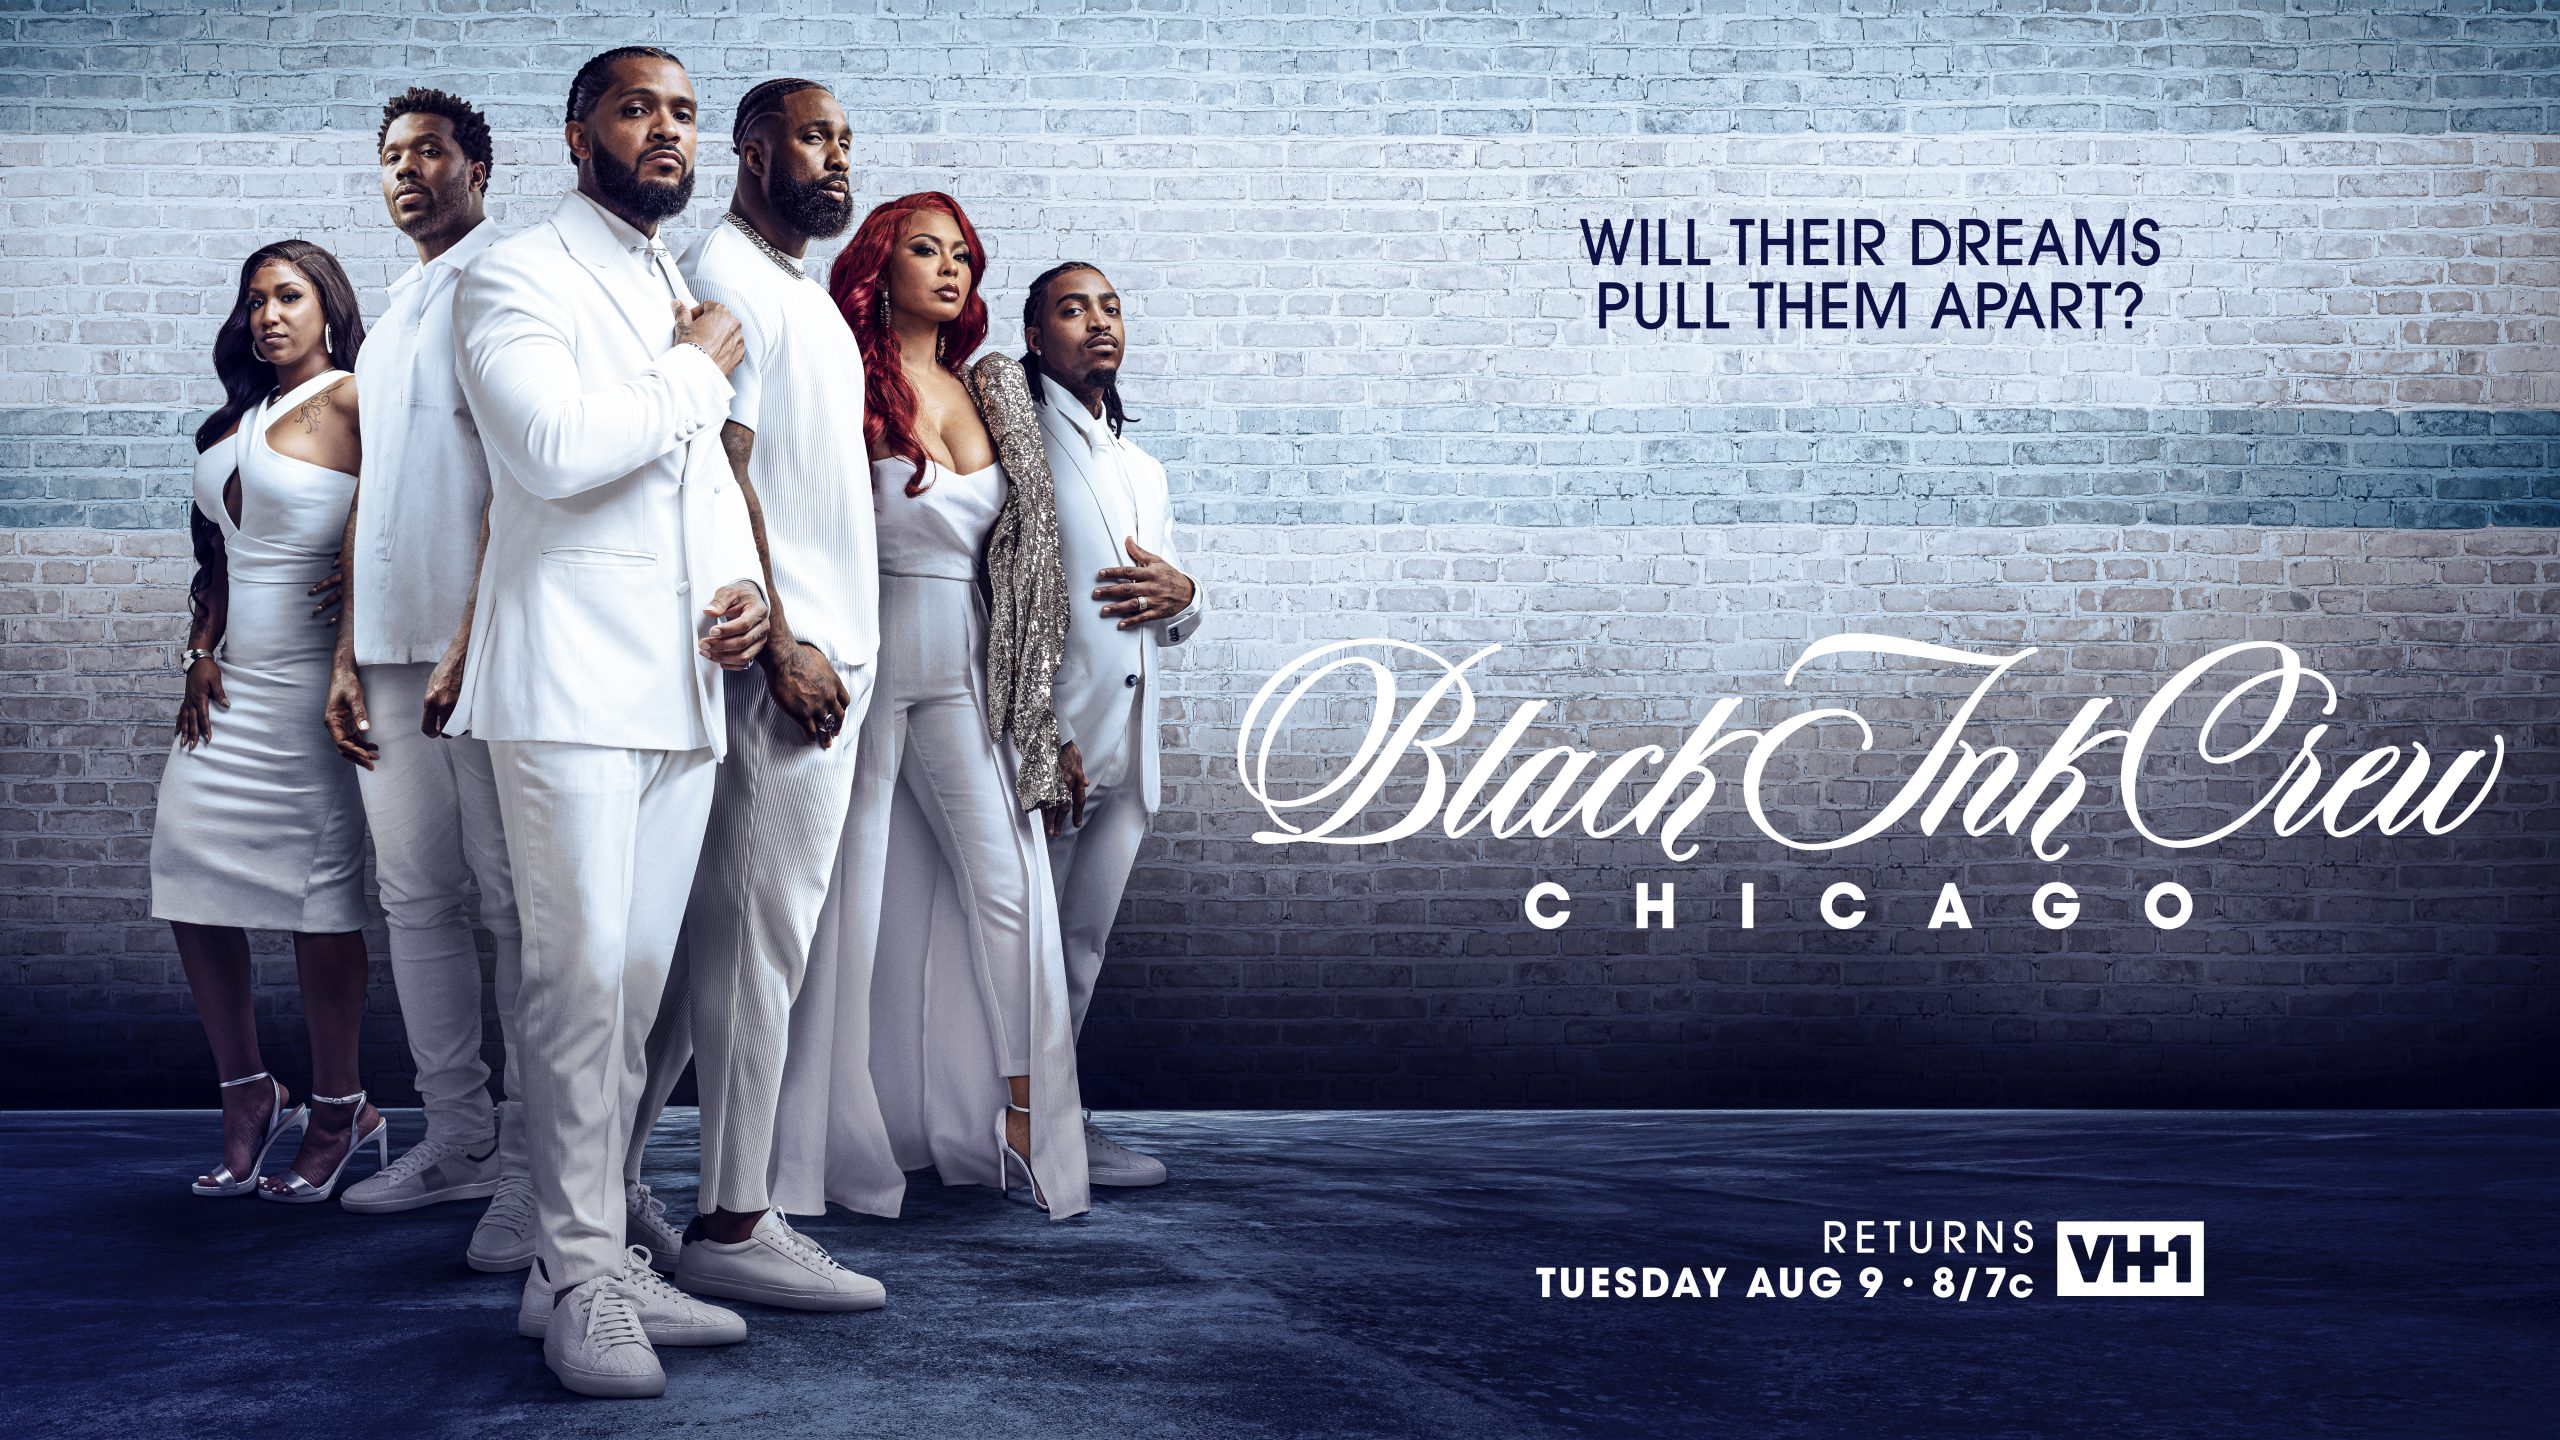 Watch the Trailer for the New Season of VH1’s 'Black Ink Crew Chicago' Set to Return on August 9